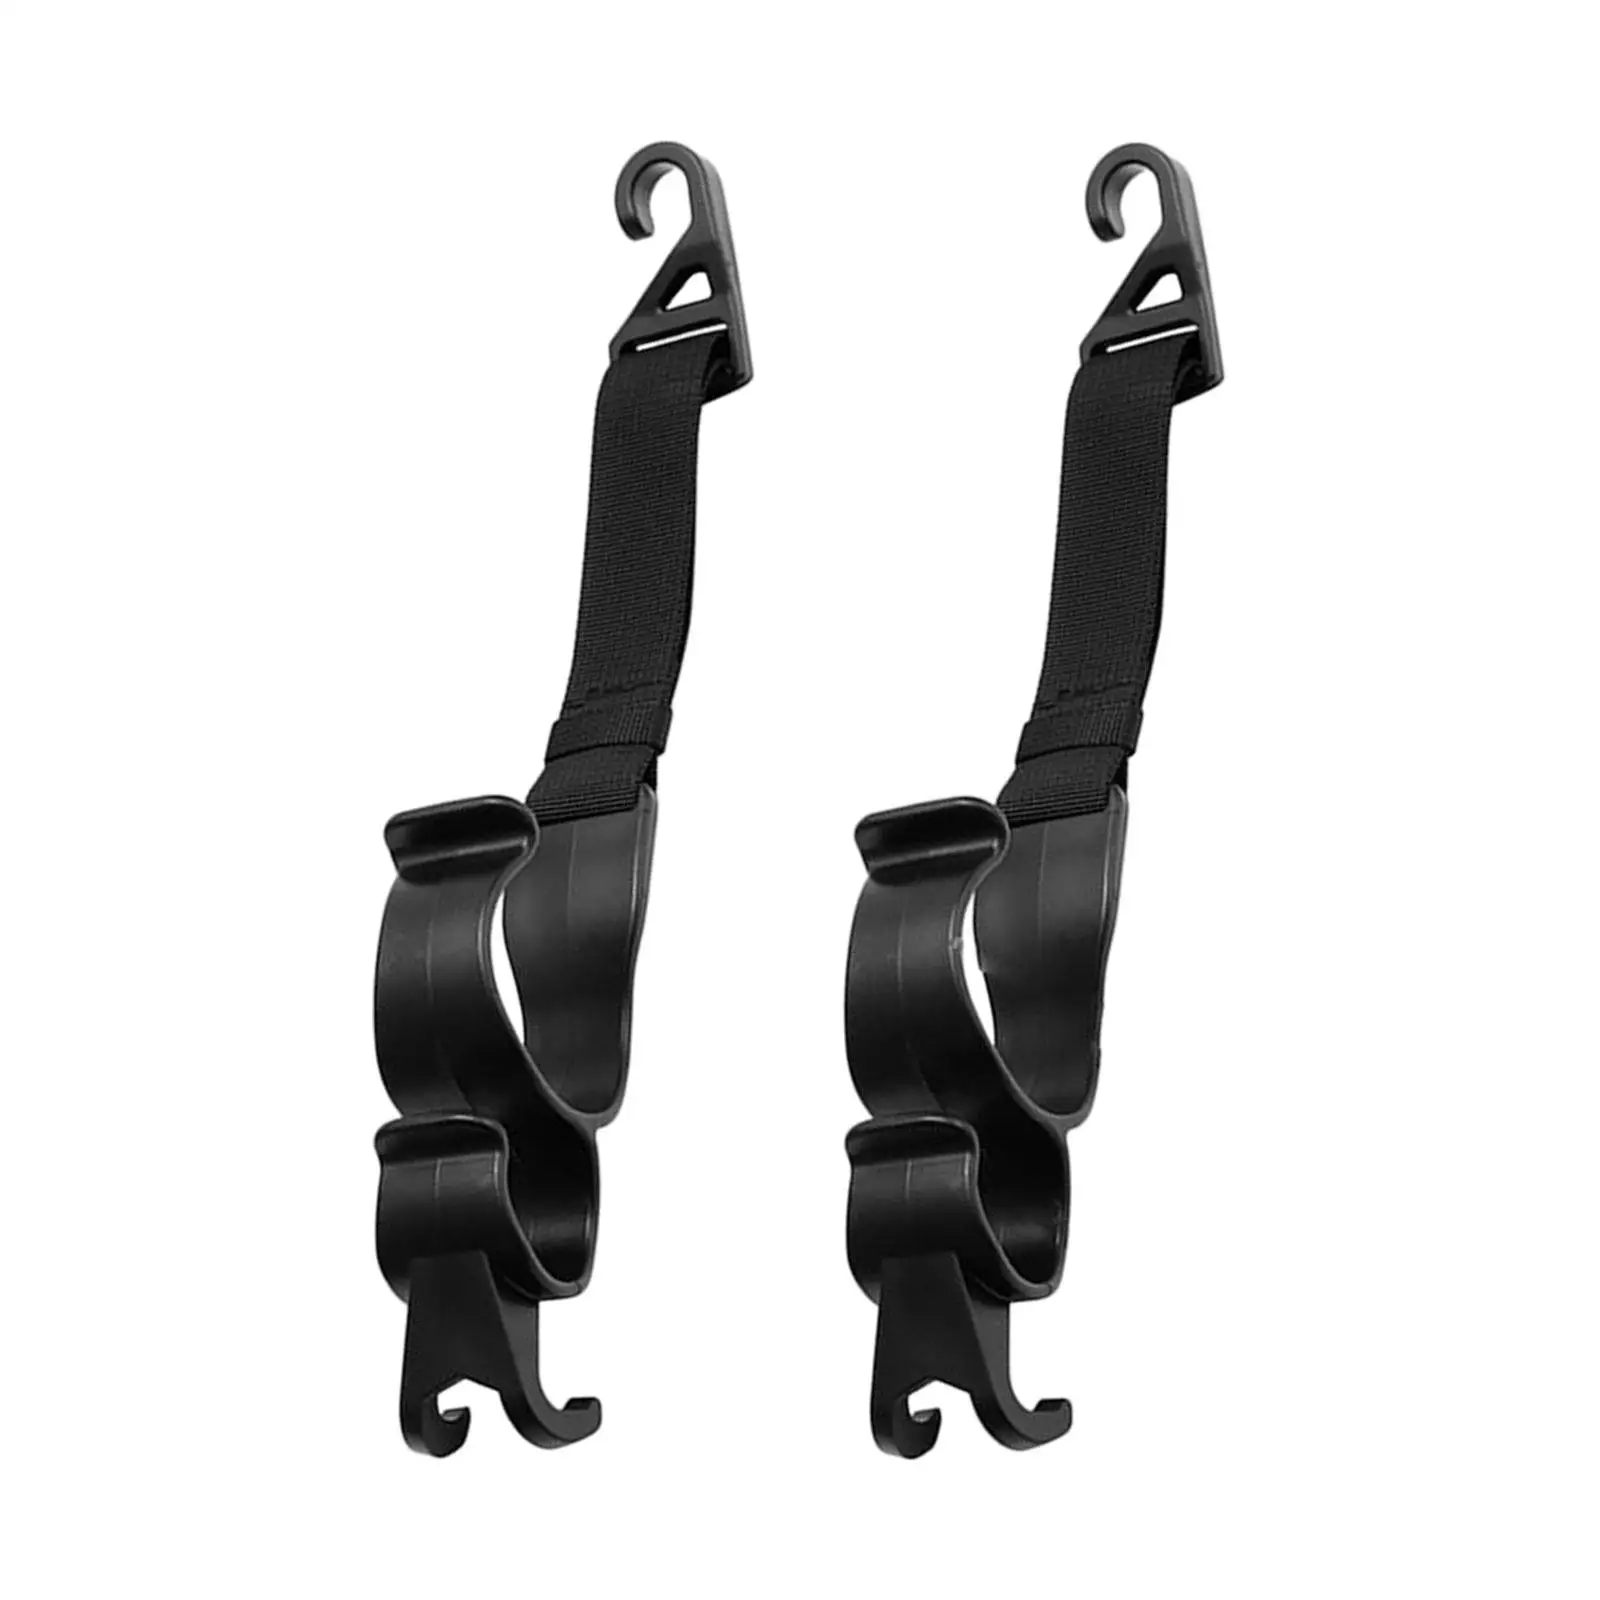 2Pcs Multifunctional Car Seat Hooks Interior Accessories Storage Organizer Seat Back Hook Hanger for Grocery Bags Backpacks